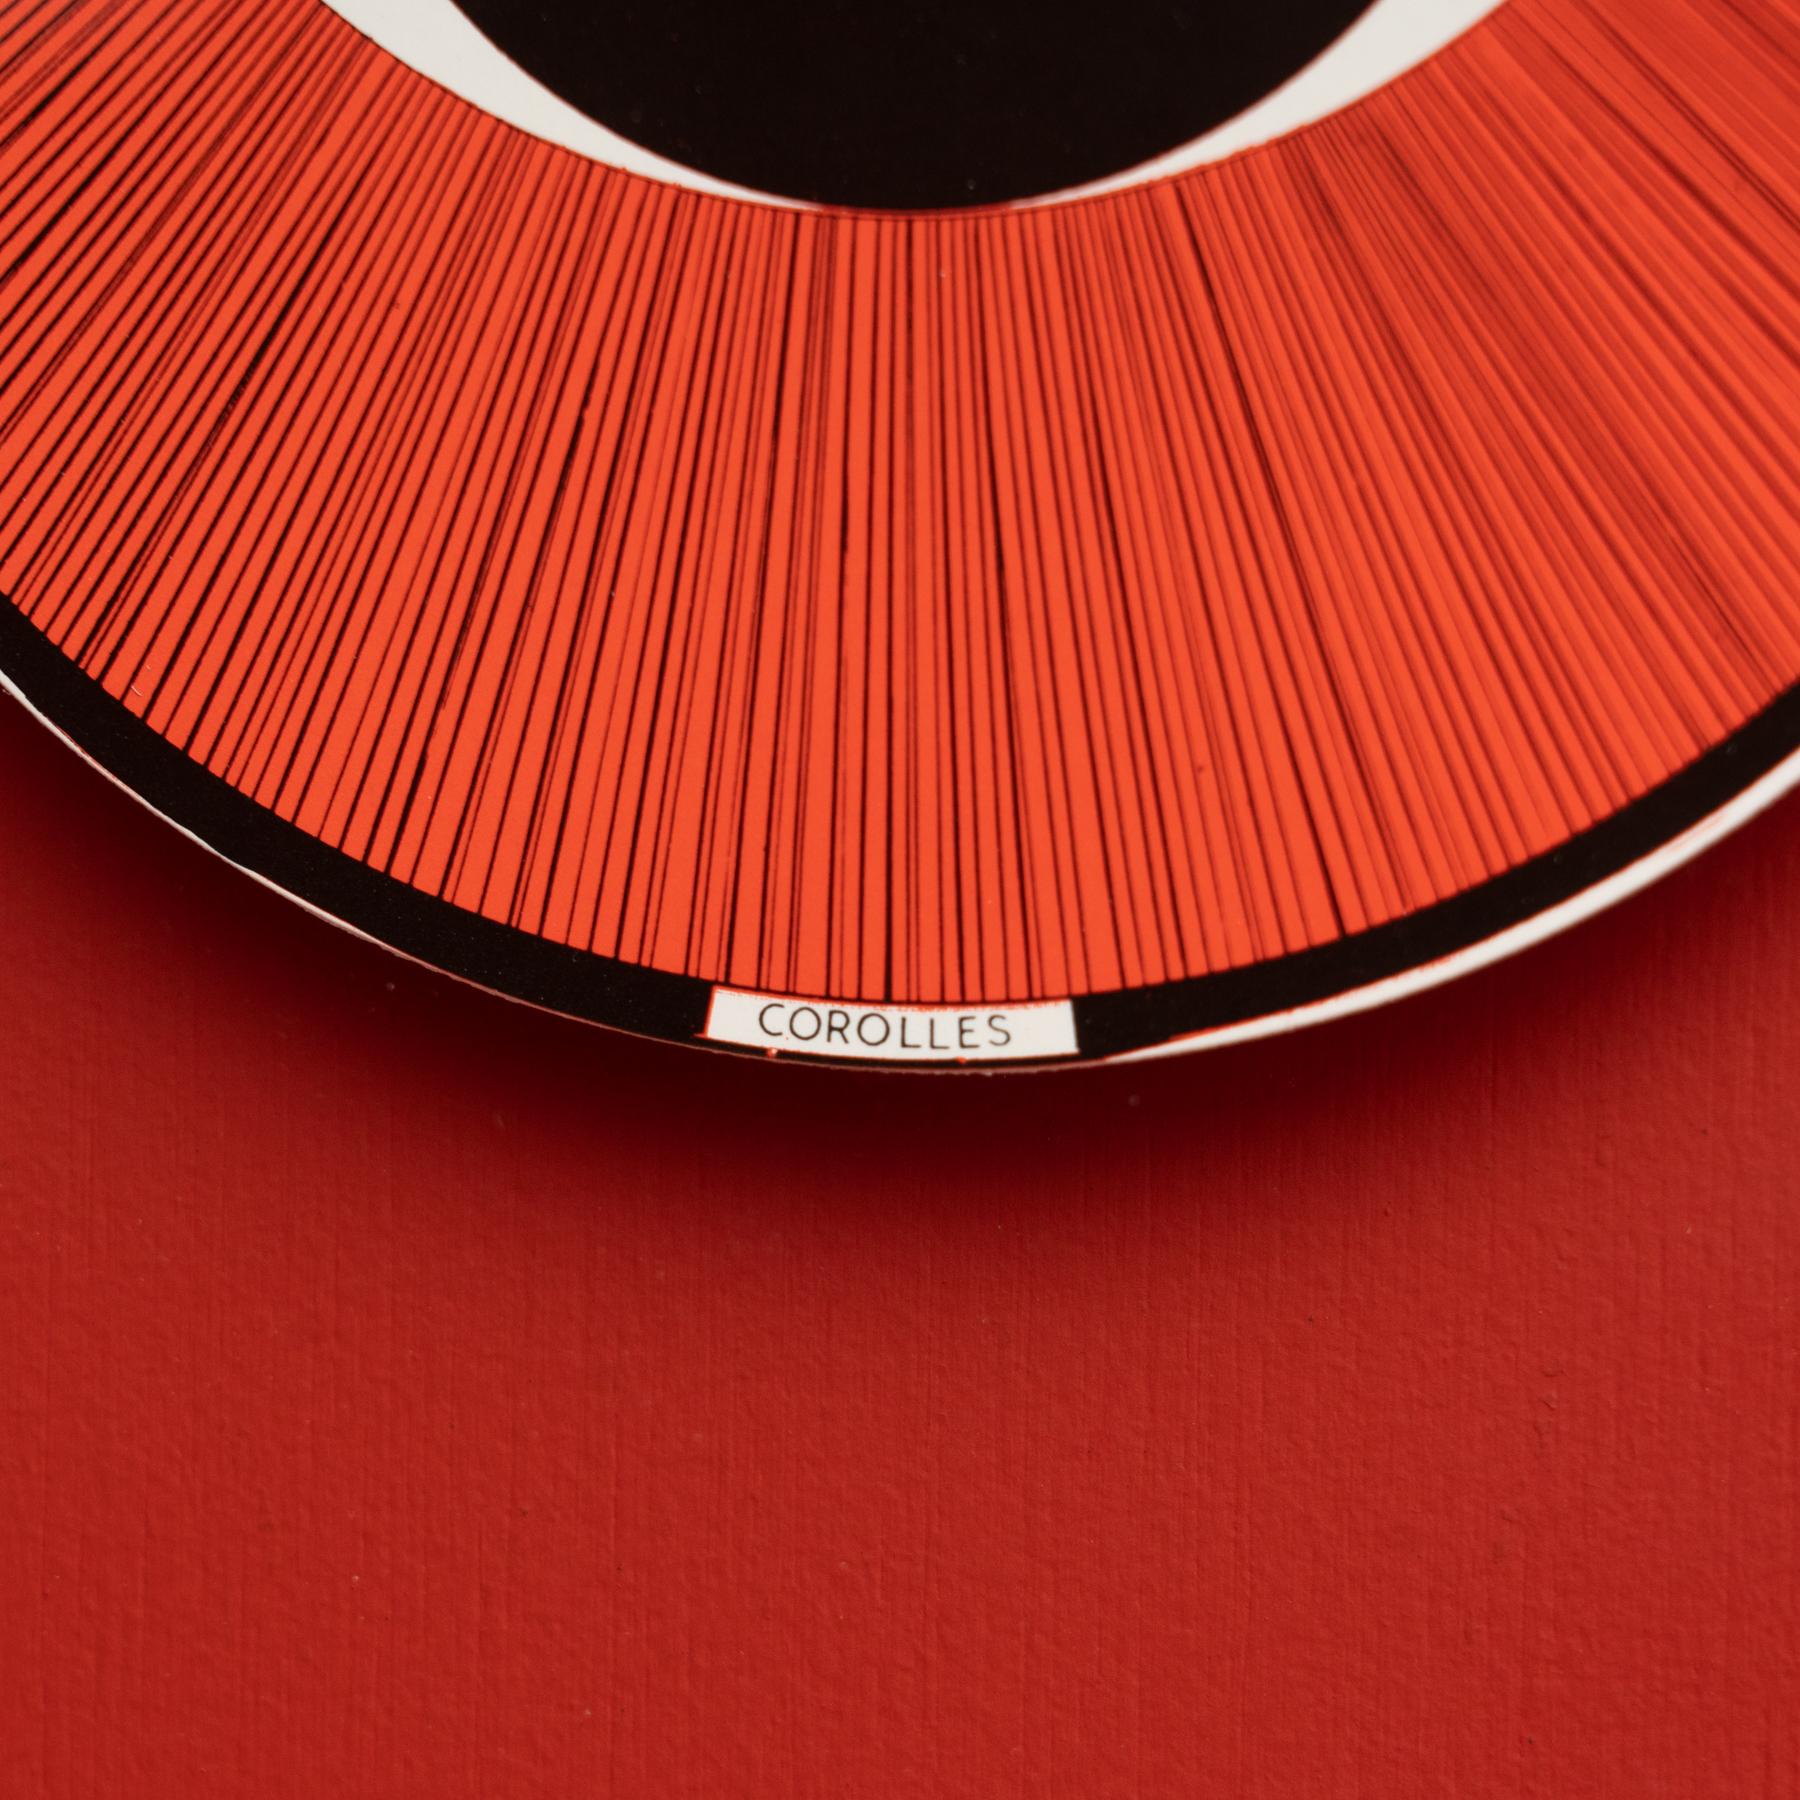 Set of 6 Marcel Duchamp Rotoreliefs Red Frmaed by Konig Series 133, 1987 For Sale 2